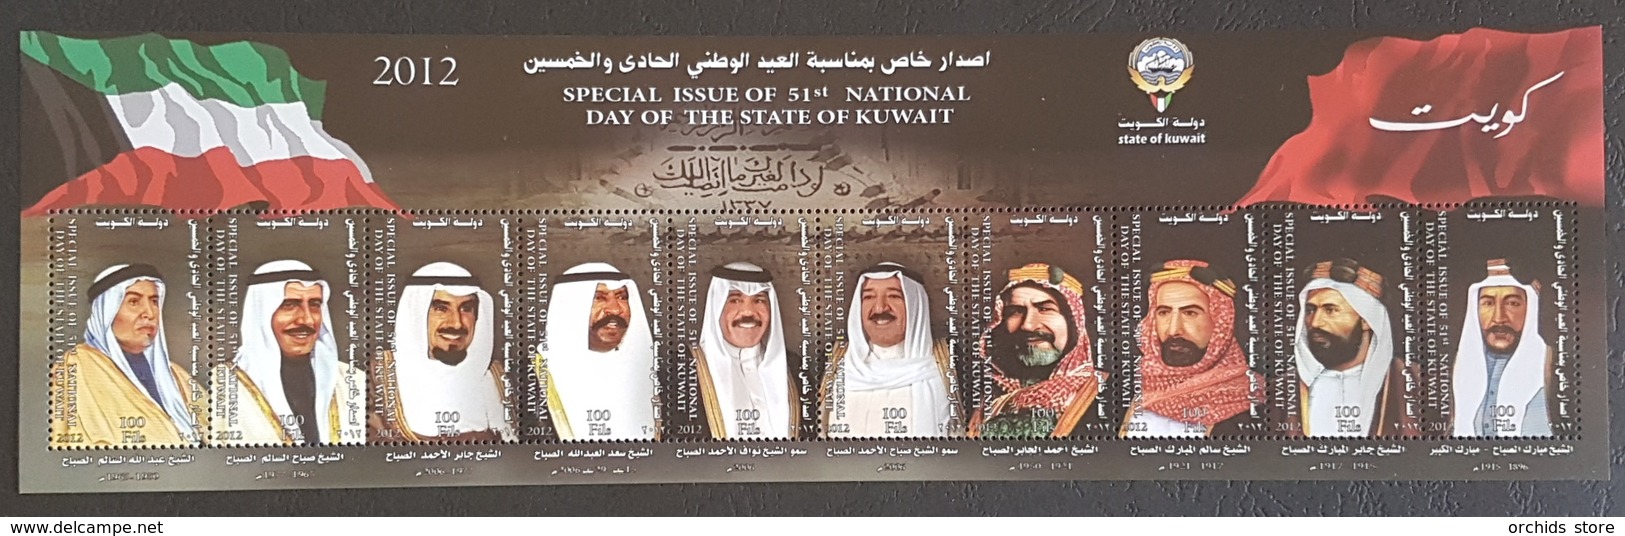 DE22 - KUWAIT 2012 Block S/S Minisheet MNH - Special Issue Of 51st National Day Of The State Emirs Rulers - Koweït